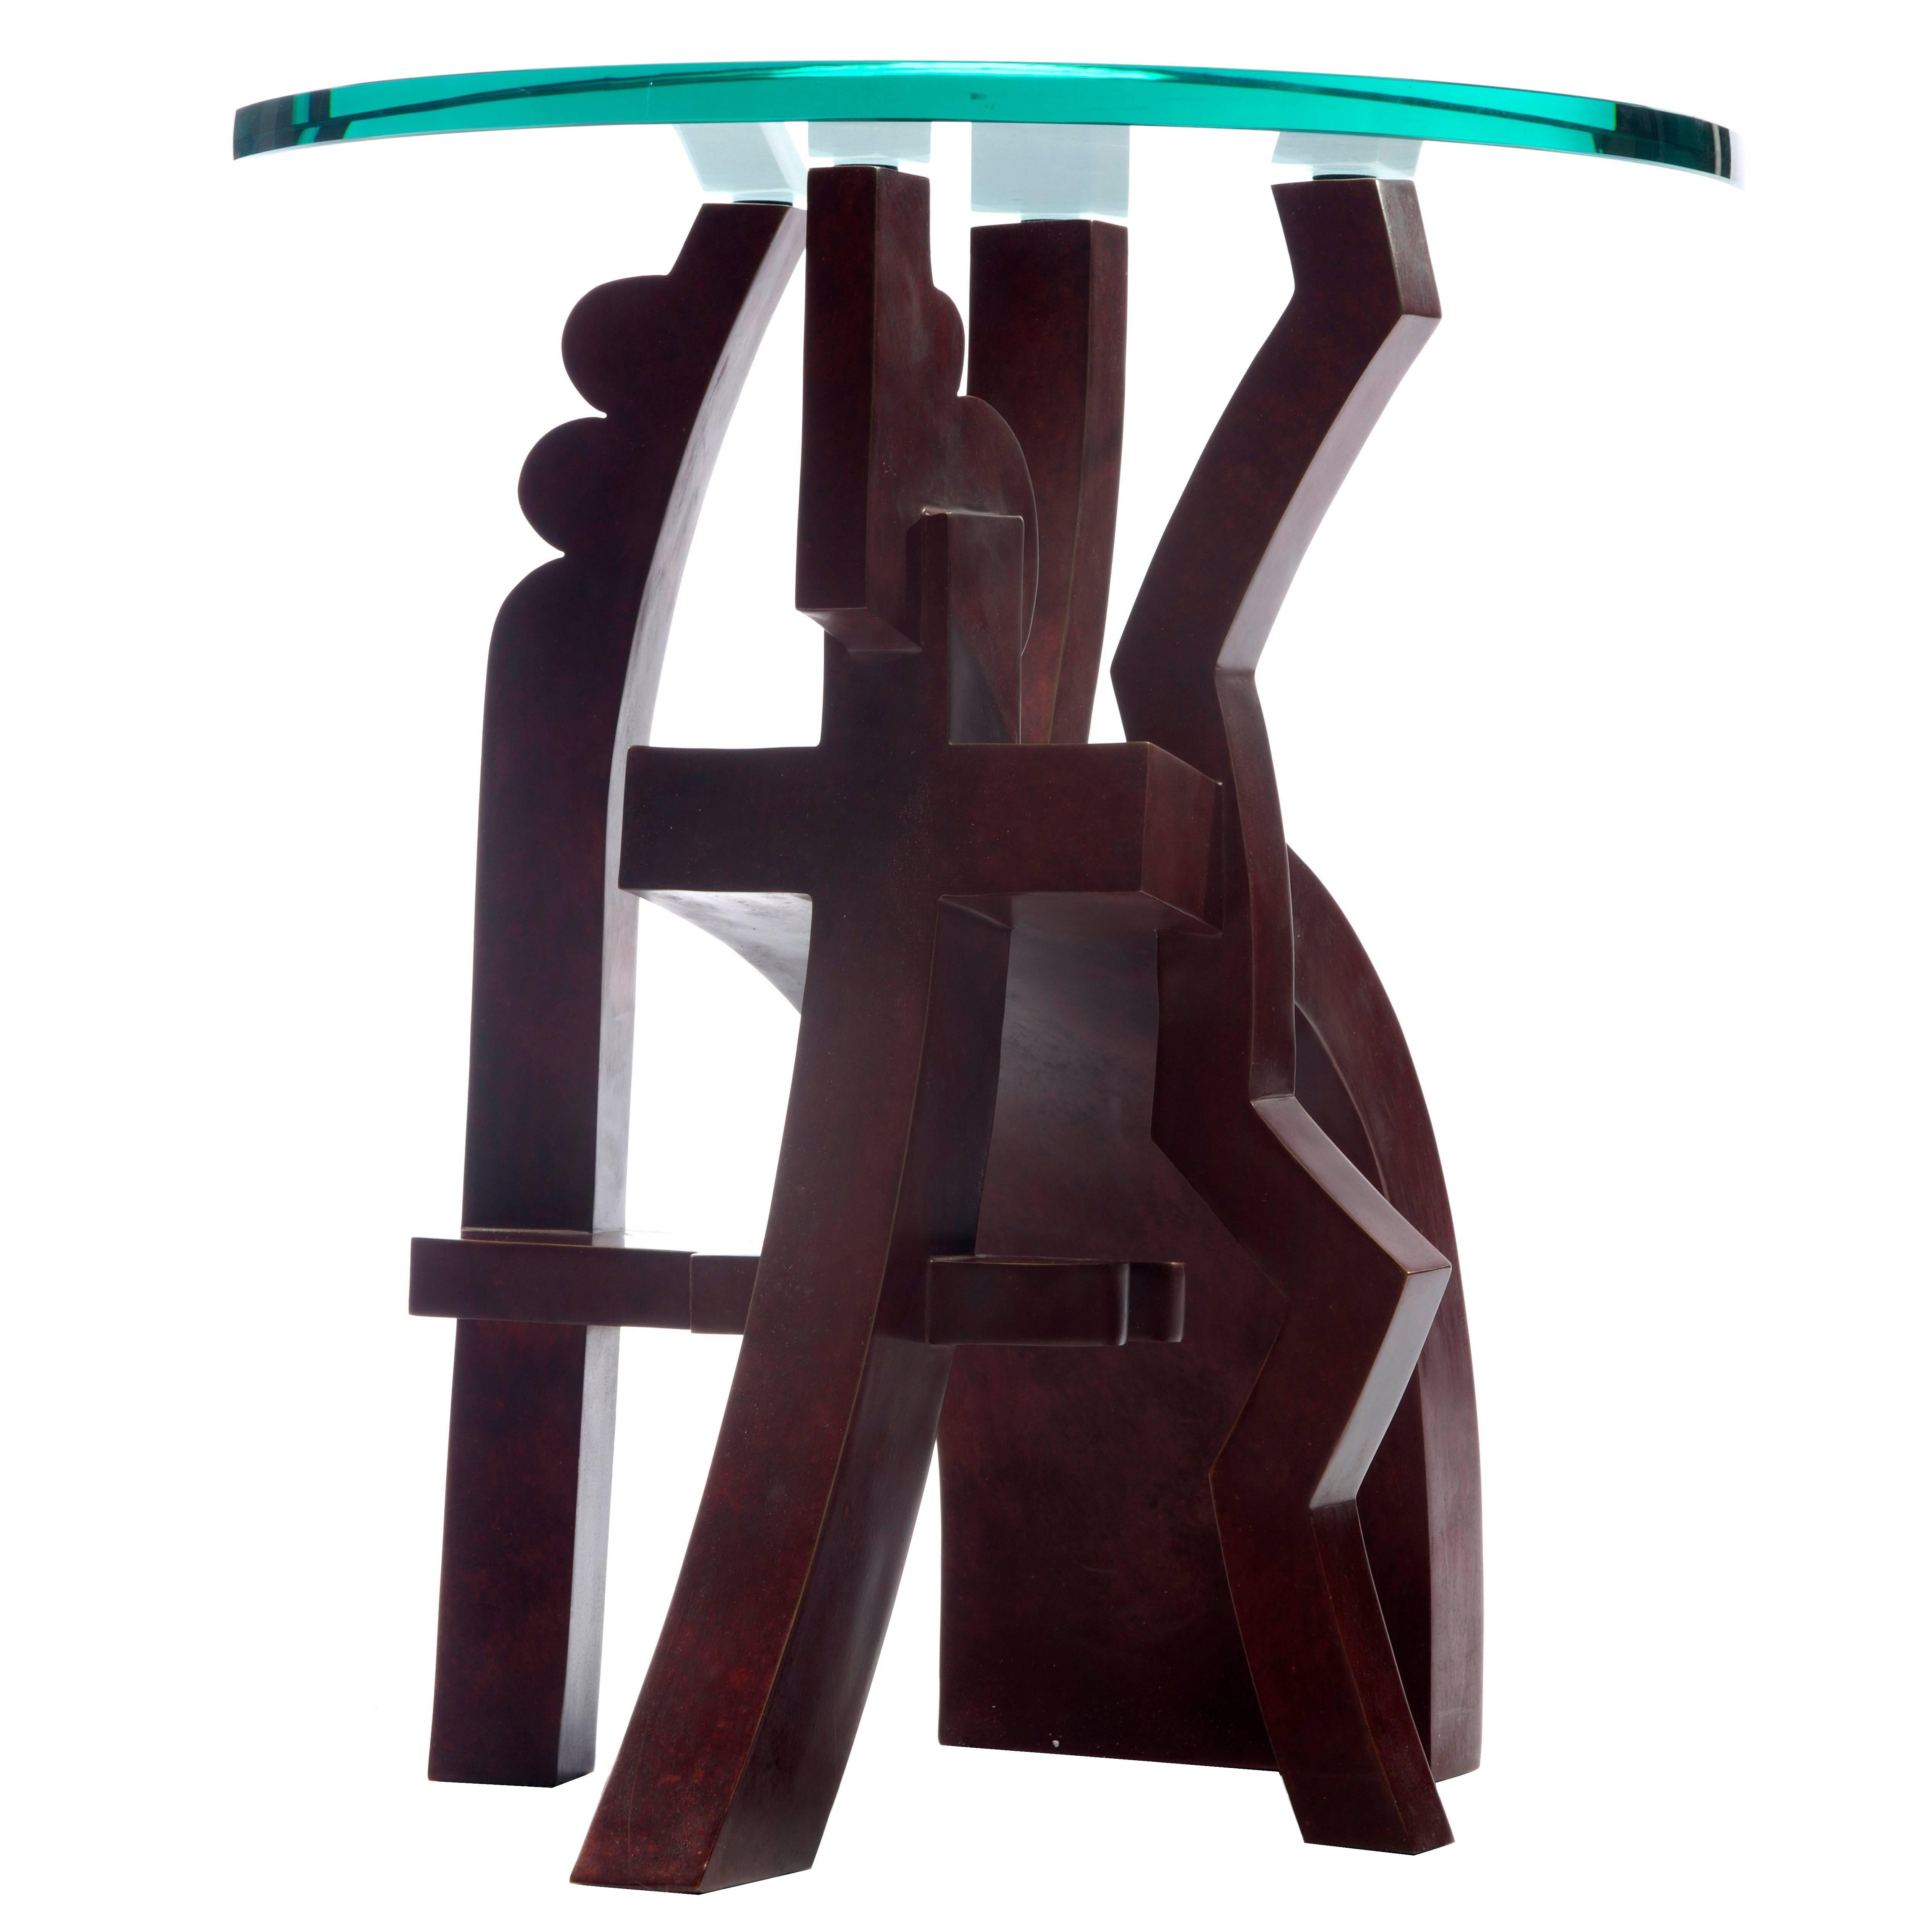 Small Side Table #1 in Patinaed Bronze and Glass by Garry Knox Bennett  For Sale